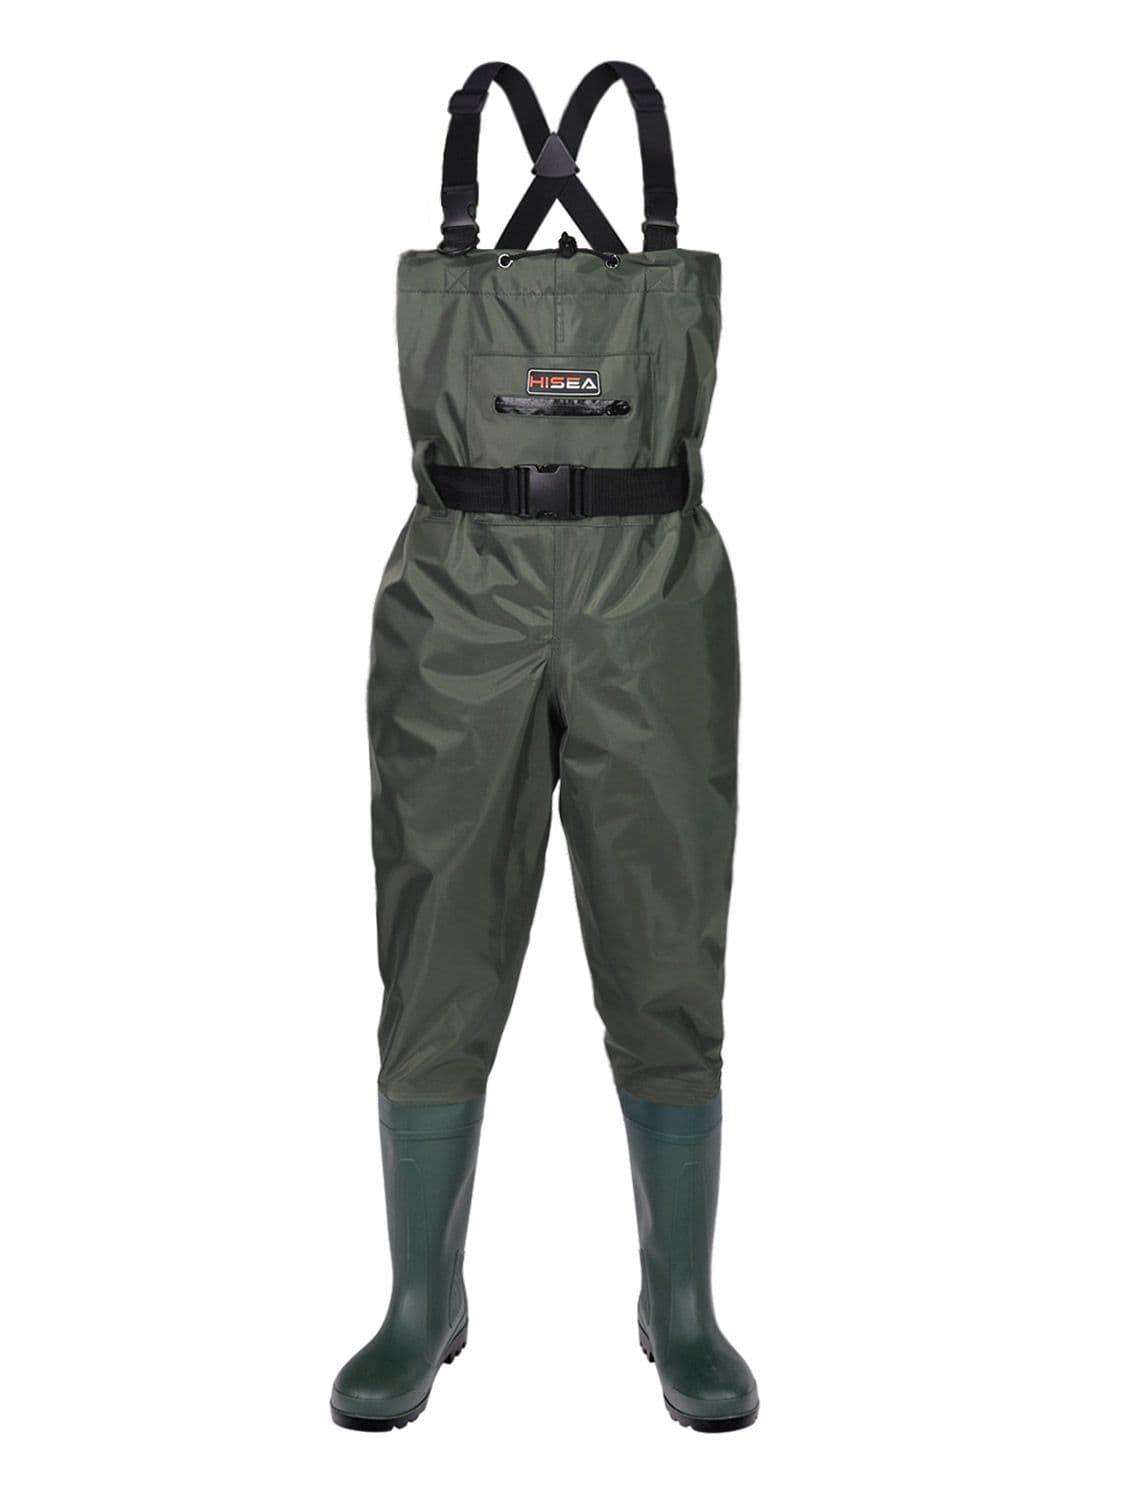 Fishing Chest Waders for Men, Fishing Waders with Boots